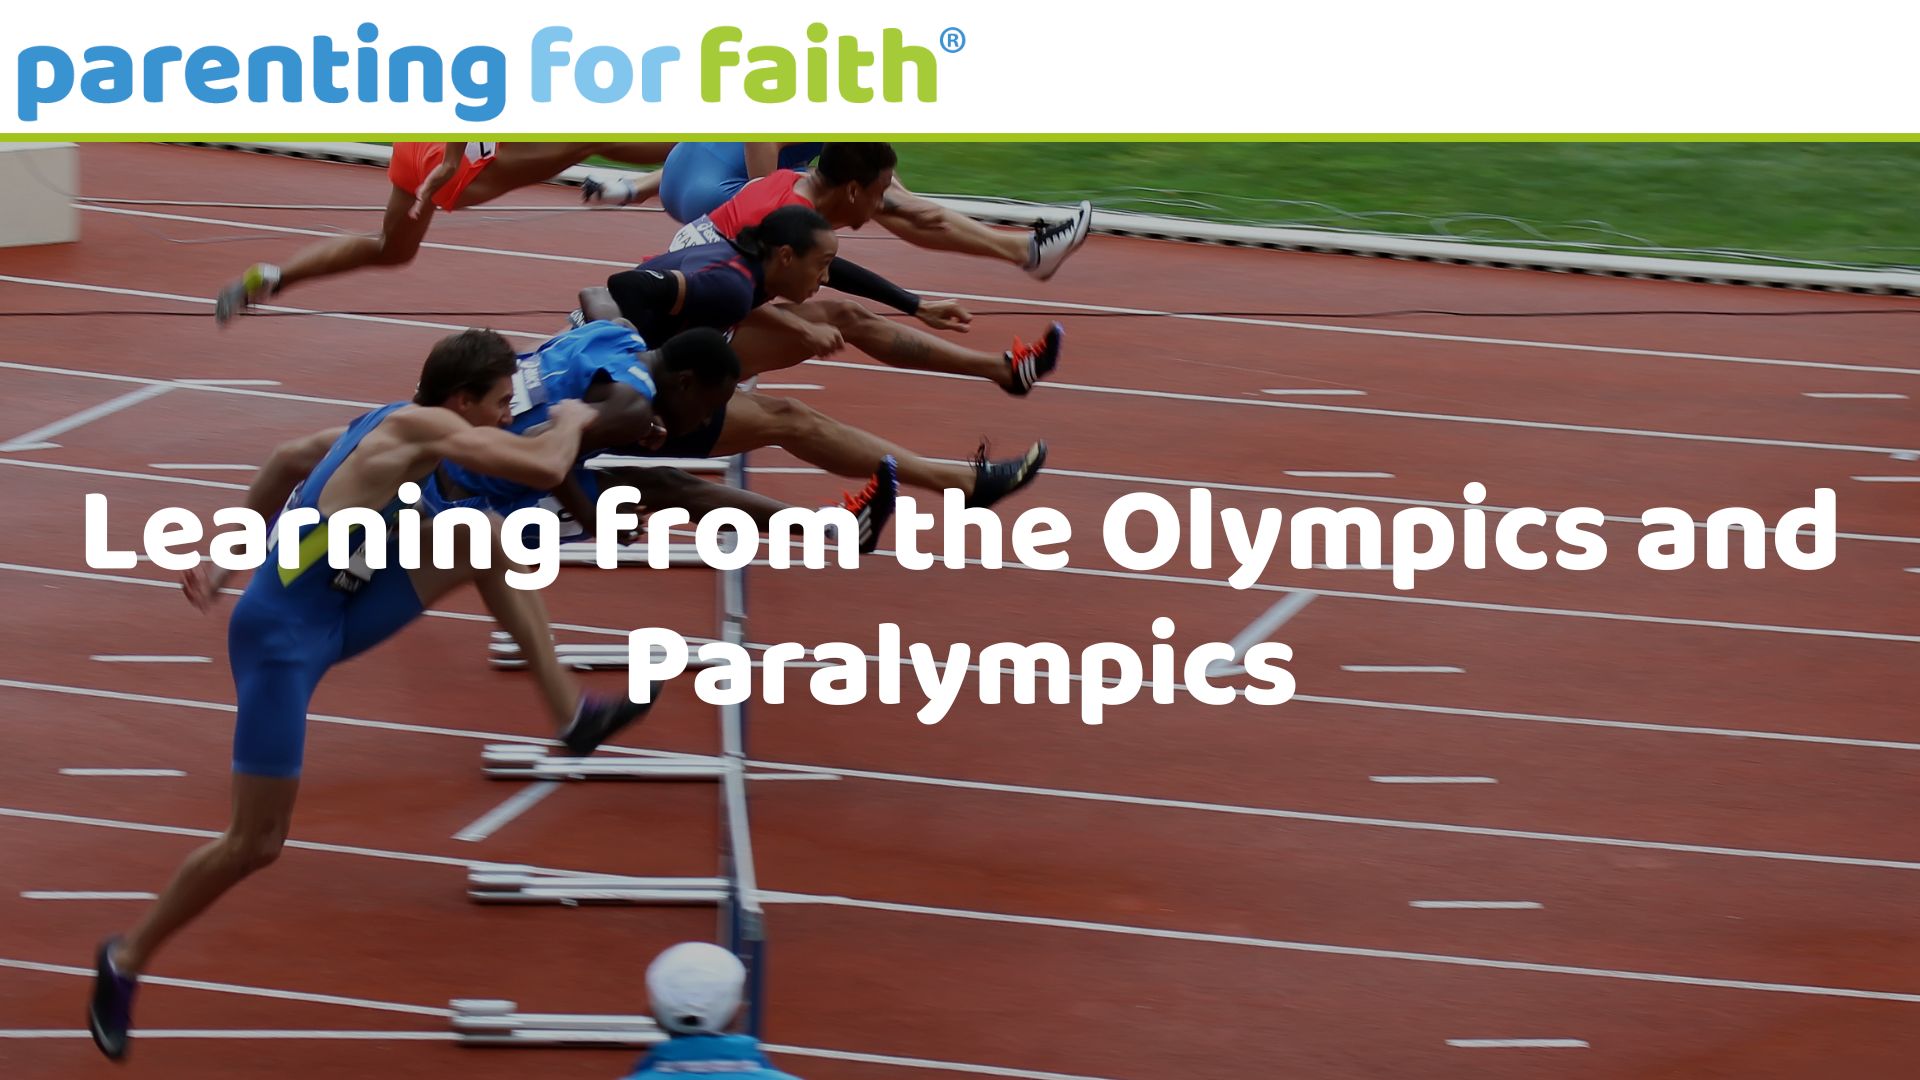 Learning from the Olympics and Paralympics image credit Denis Kuvaev